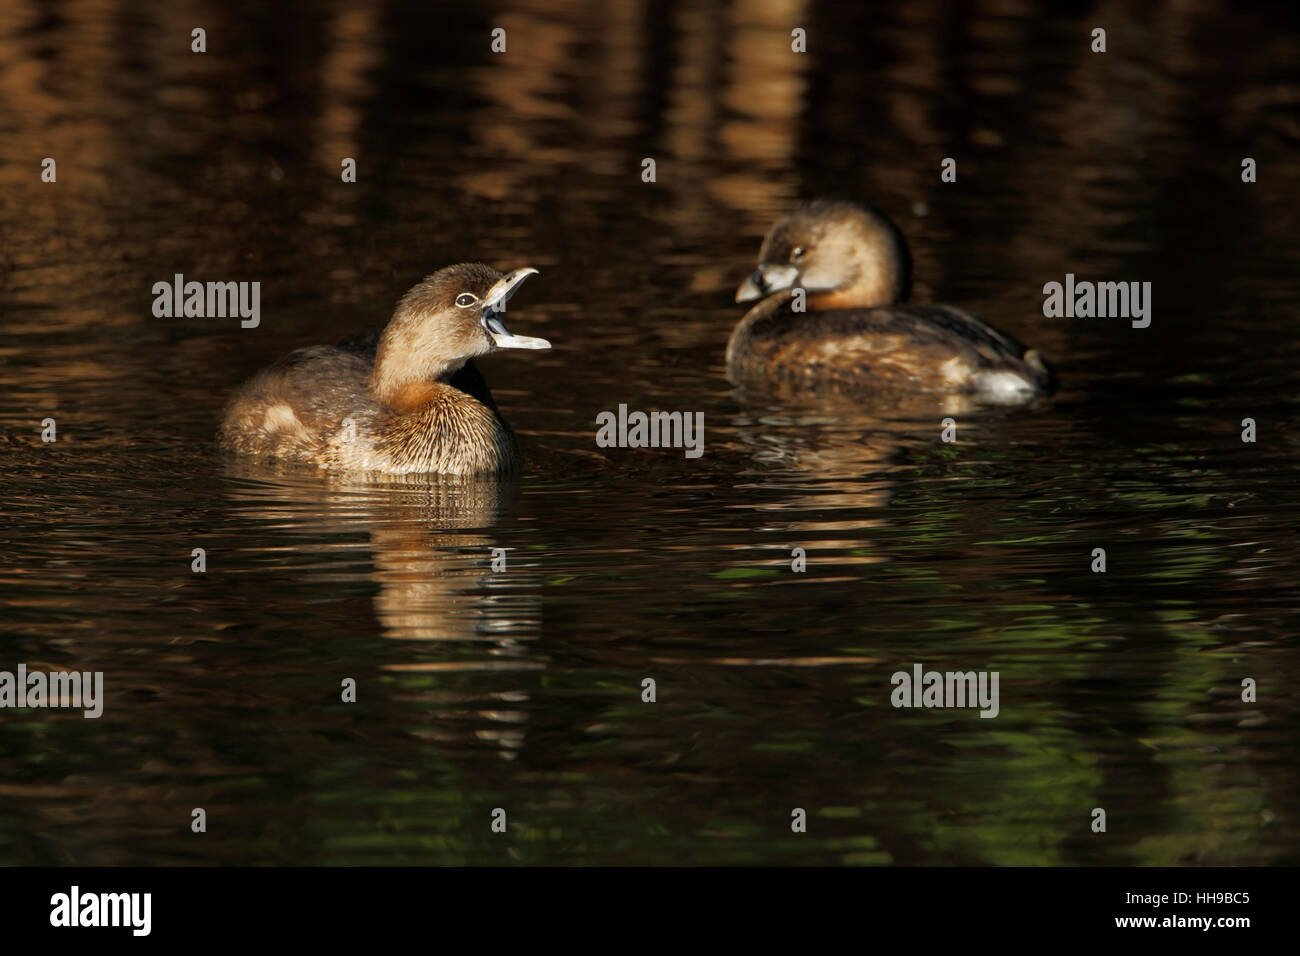 Pied-billed grebe (Podilymbus podiceps) in water with open beak in early morning light, Ding Darling NWR, Florida, USA Stock Photo